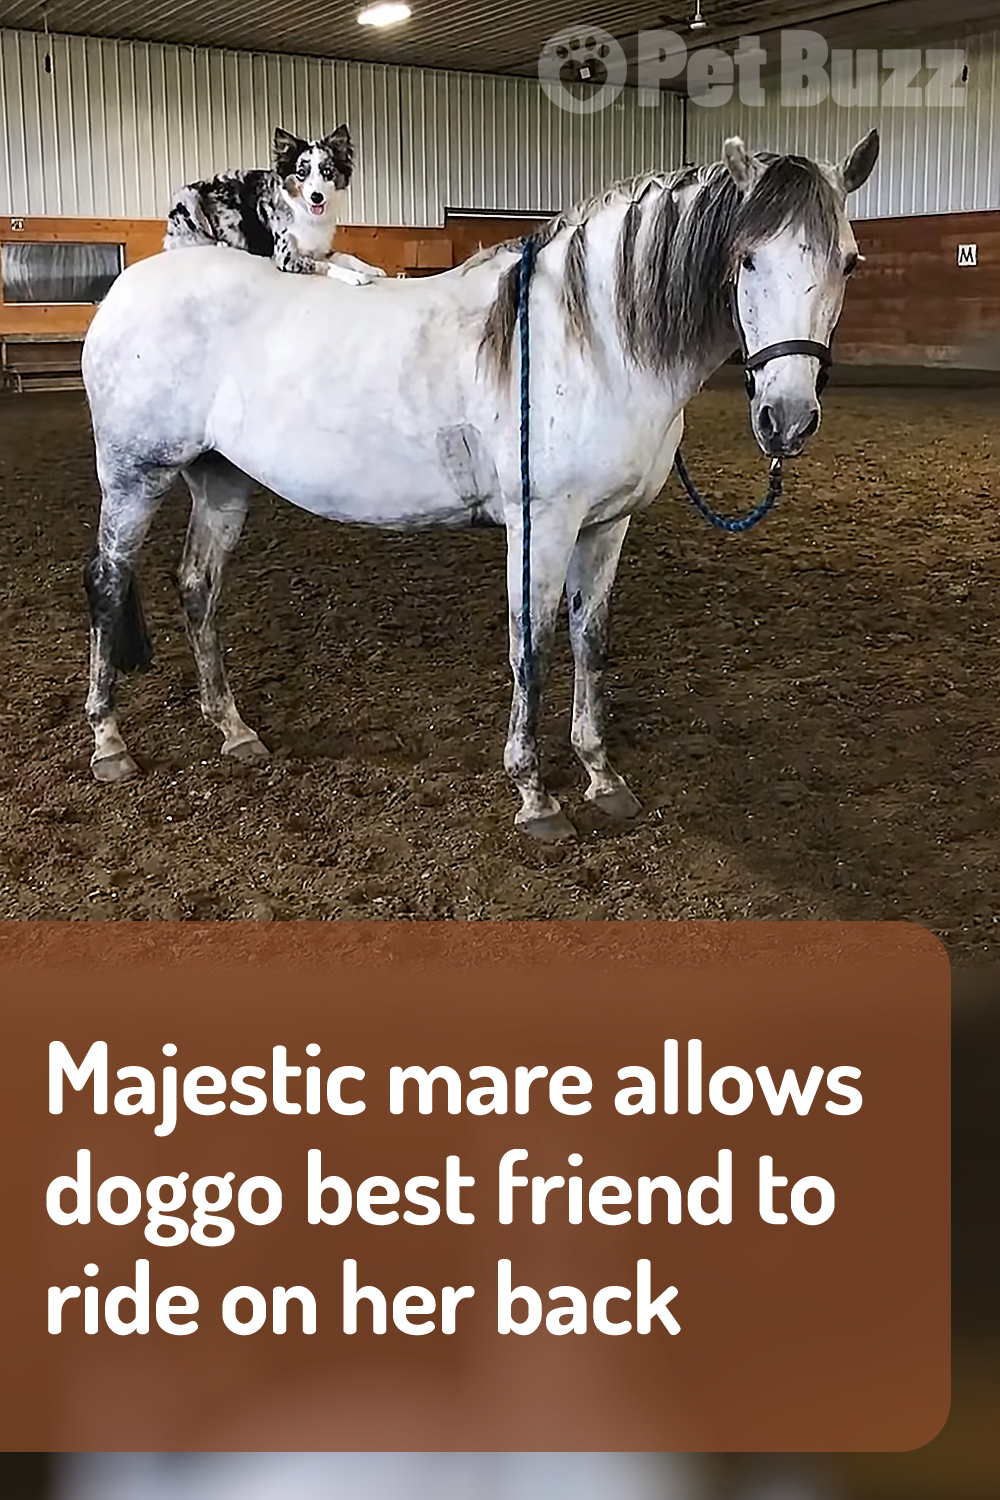 Majestic mare allows doggo best friend to ride on her back